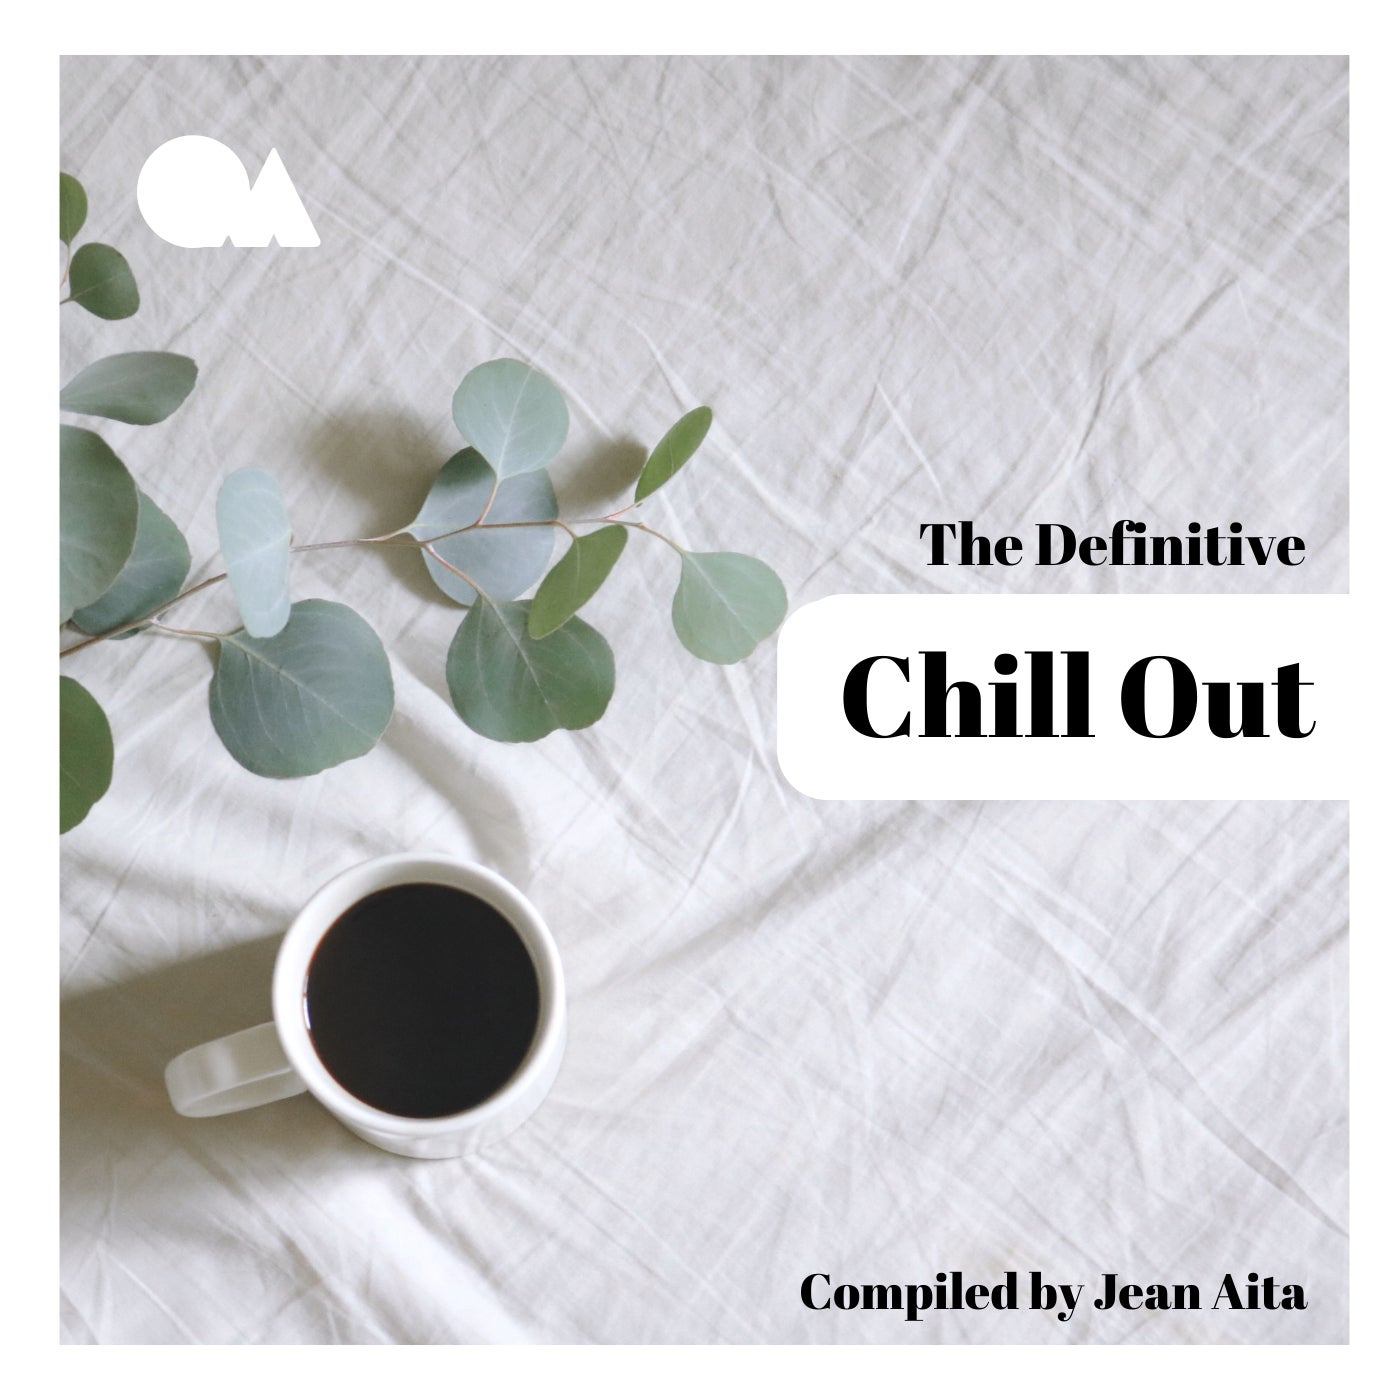 The Definitive Chill Out